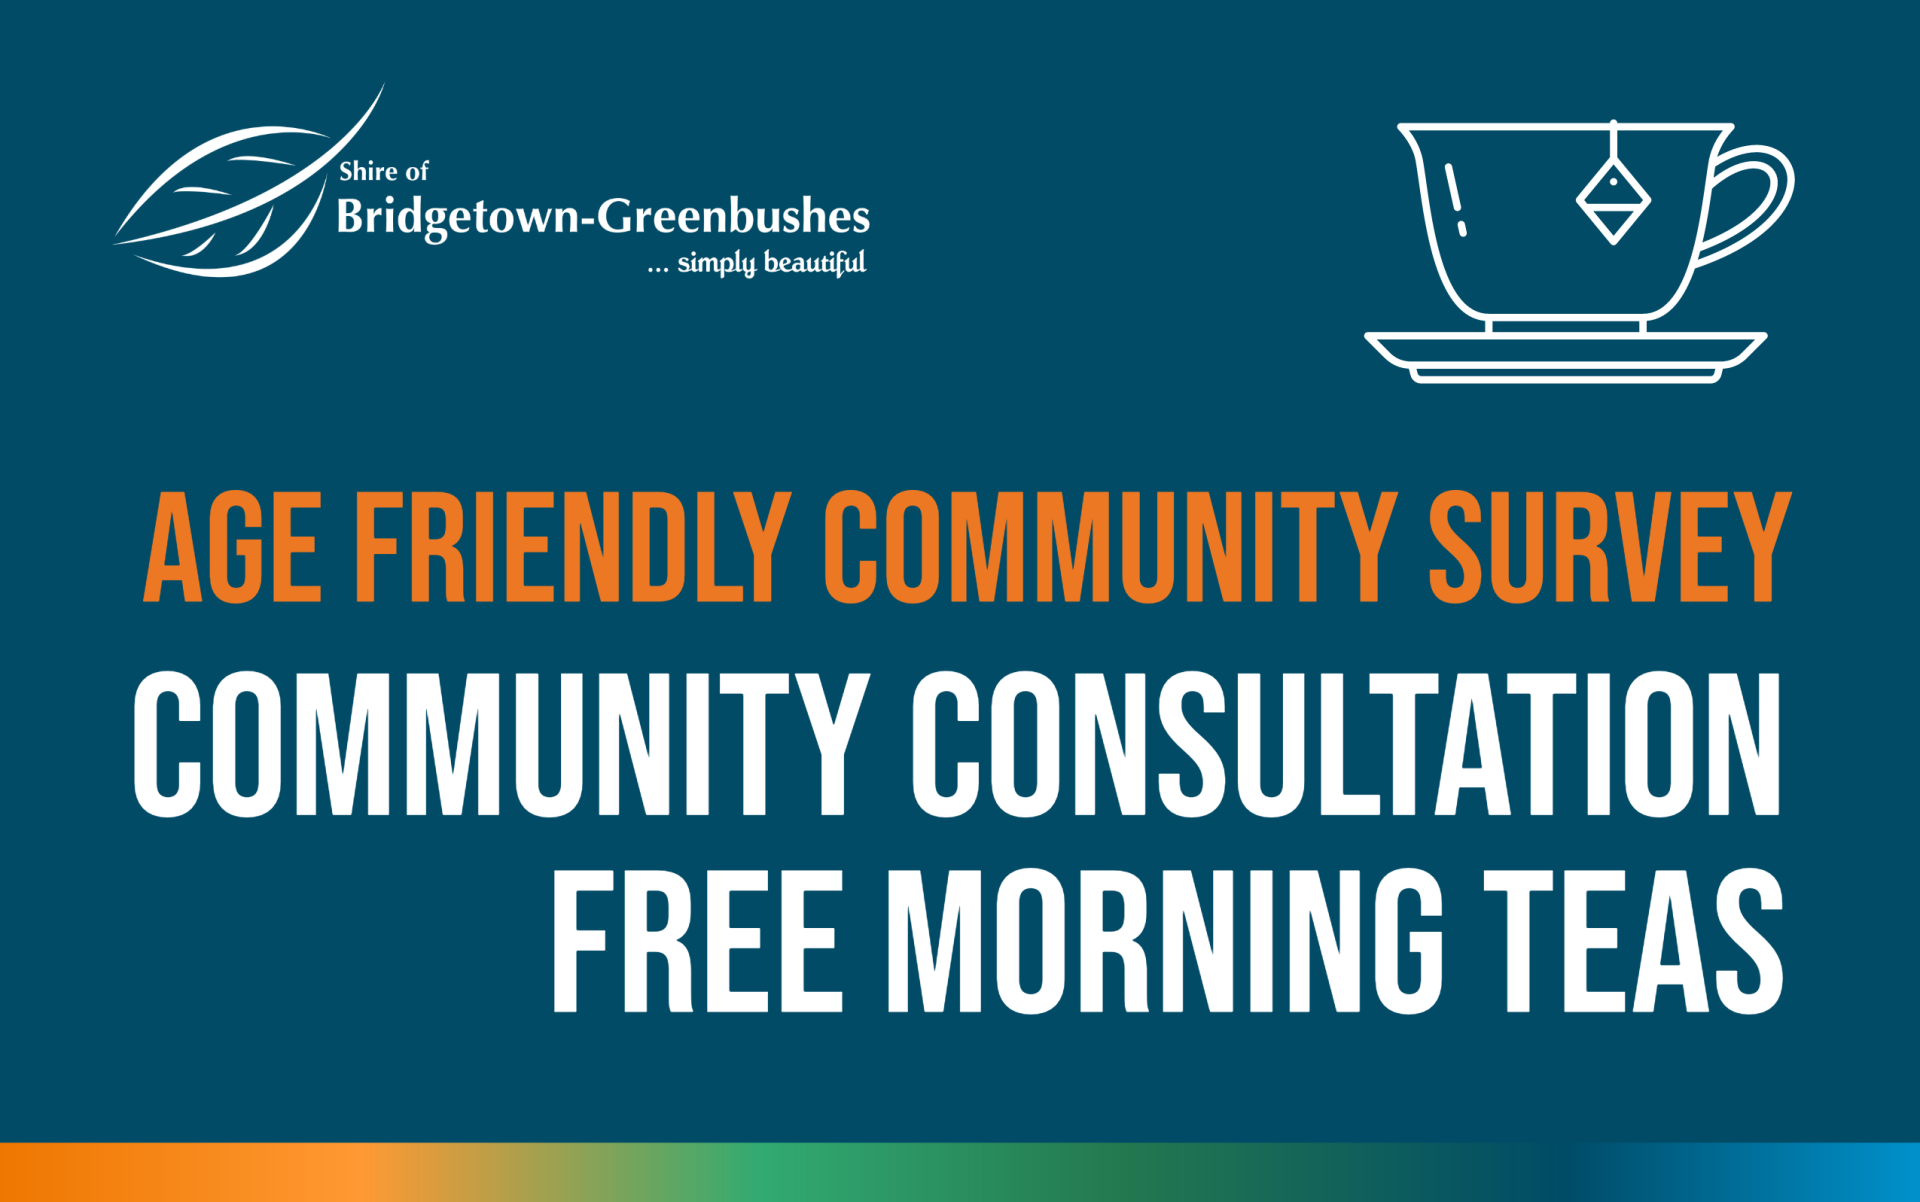 Join Us For MorningTea and Share Your Thoughts